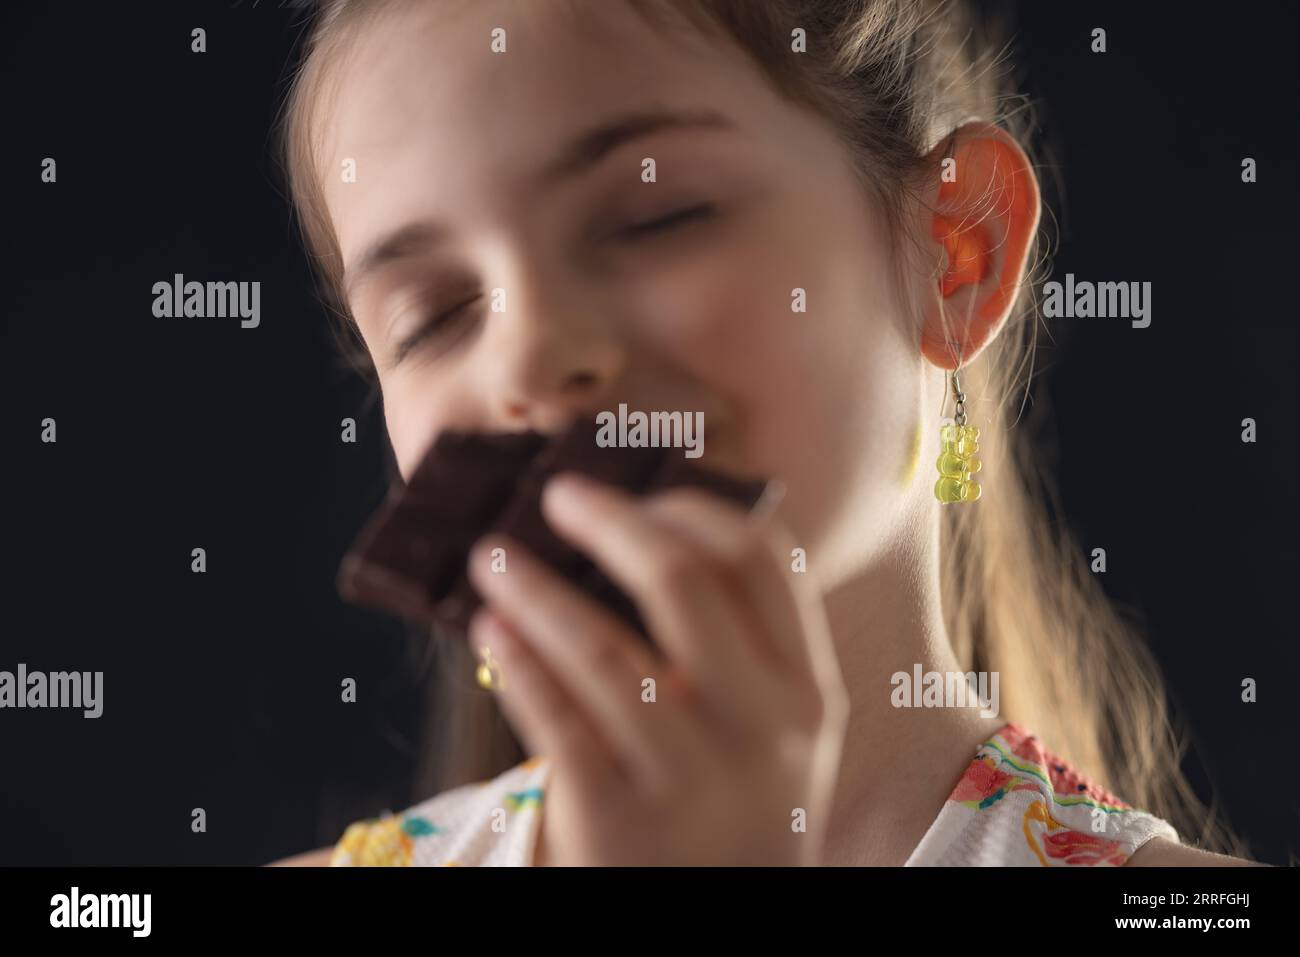 Chocolate and pretty hungry little woman portrait. Beautiful girl ready to eat chocolate bar. Stock Photo